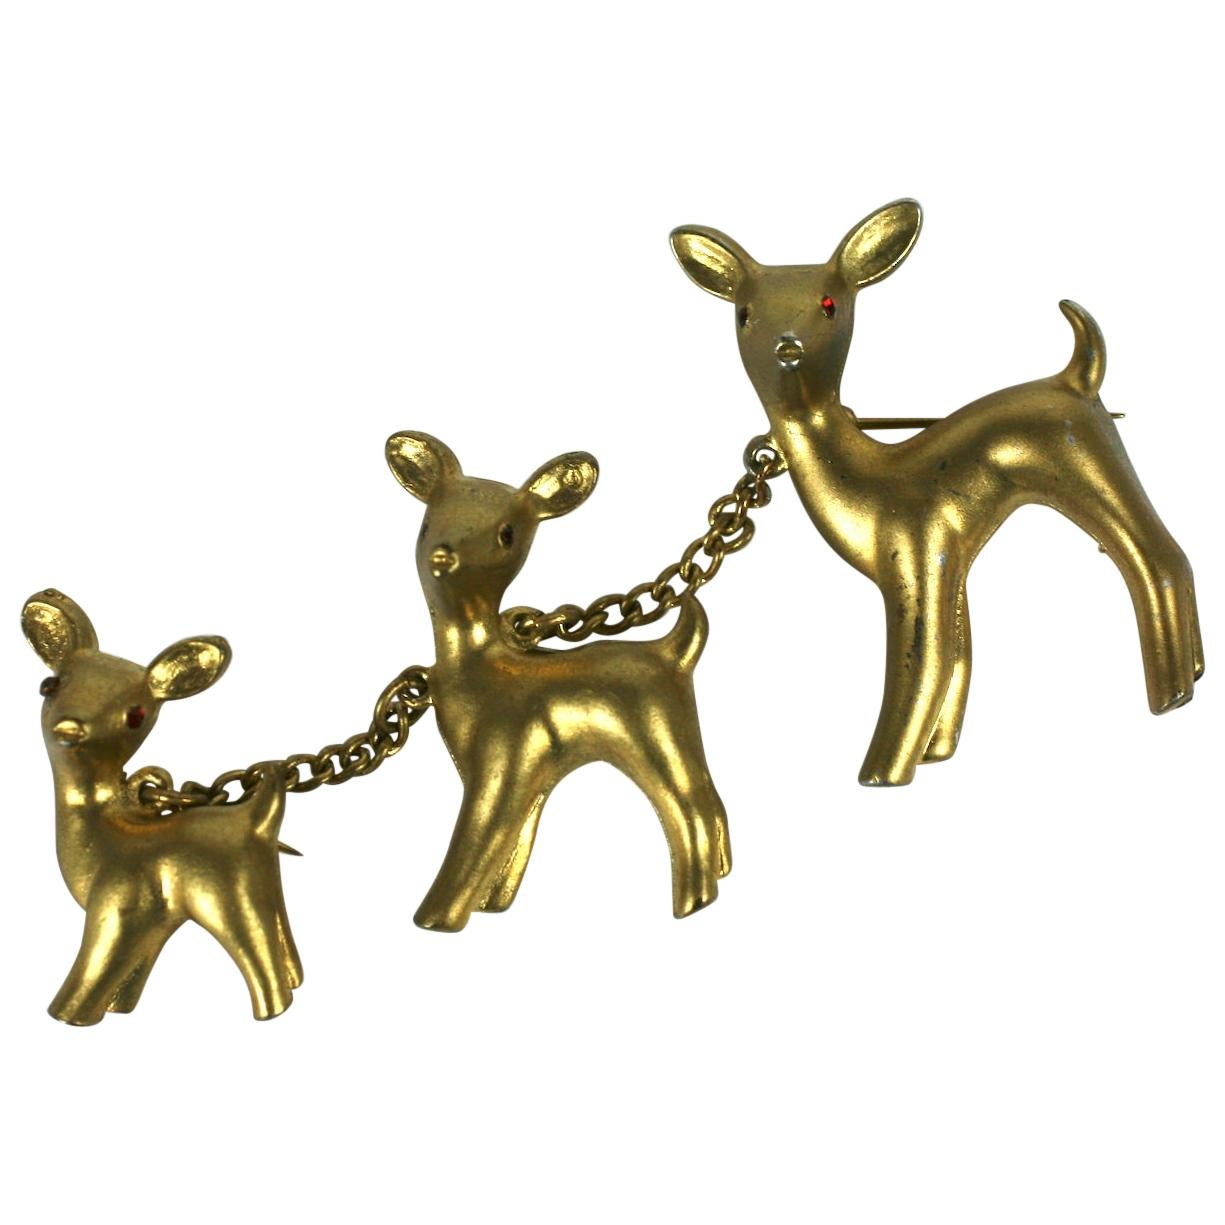 Art Deco Reinad USA "Chanel" Deer Family Brooch For Sale